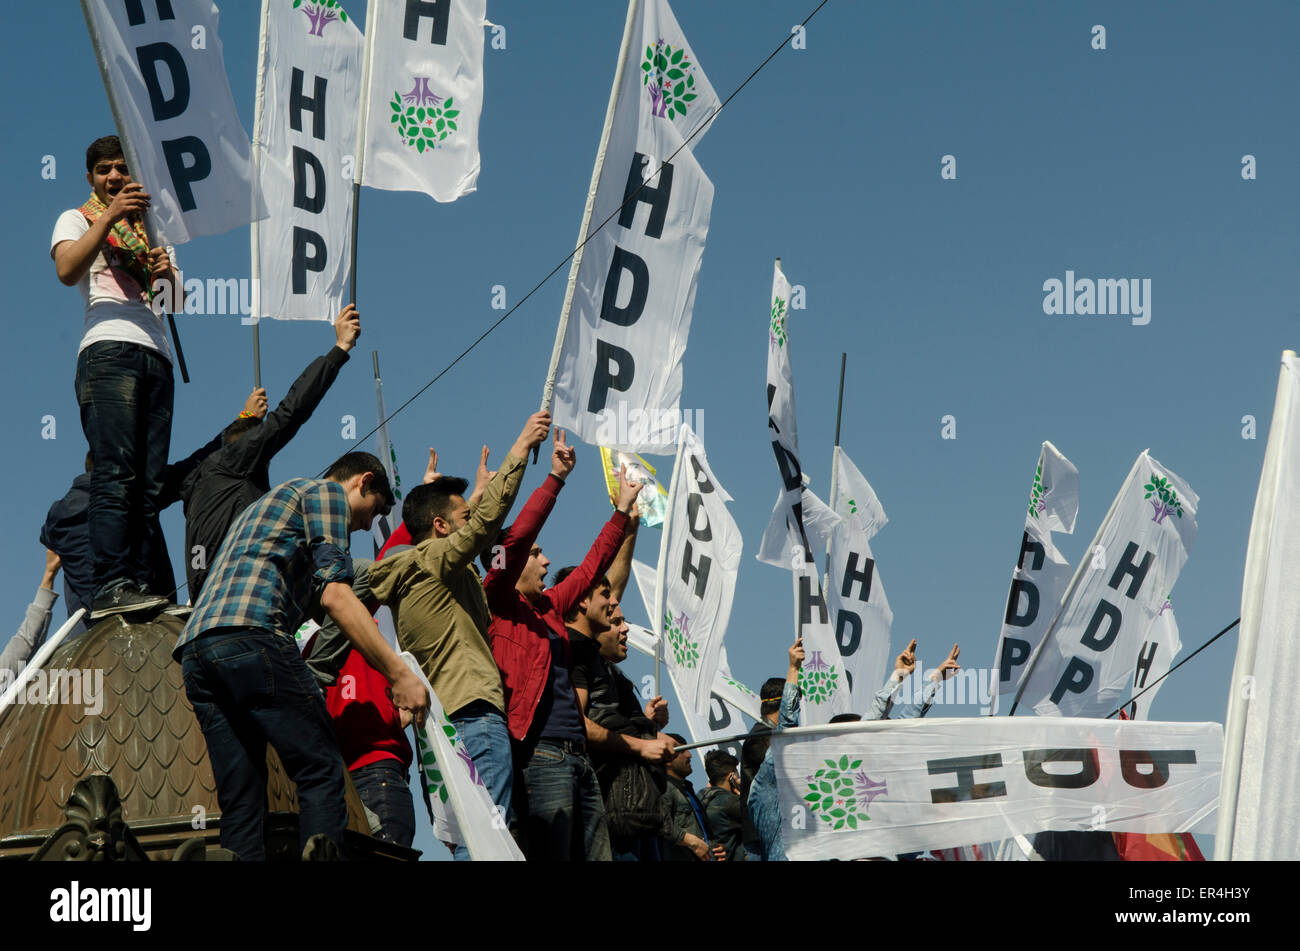 Hdp (Peoples' Democratic Party) Supporters at Turkish election Rally Istanbul Stock Photo